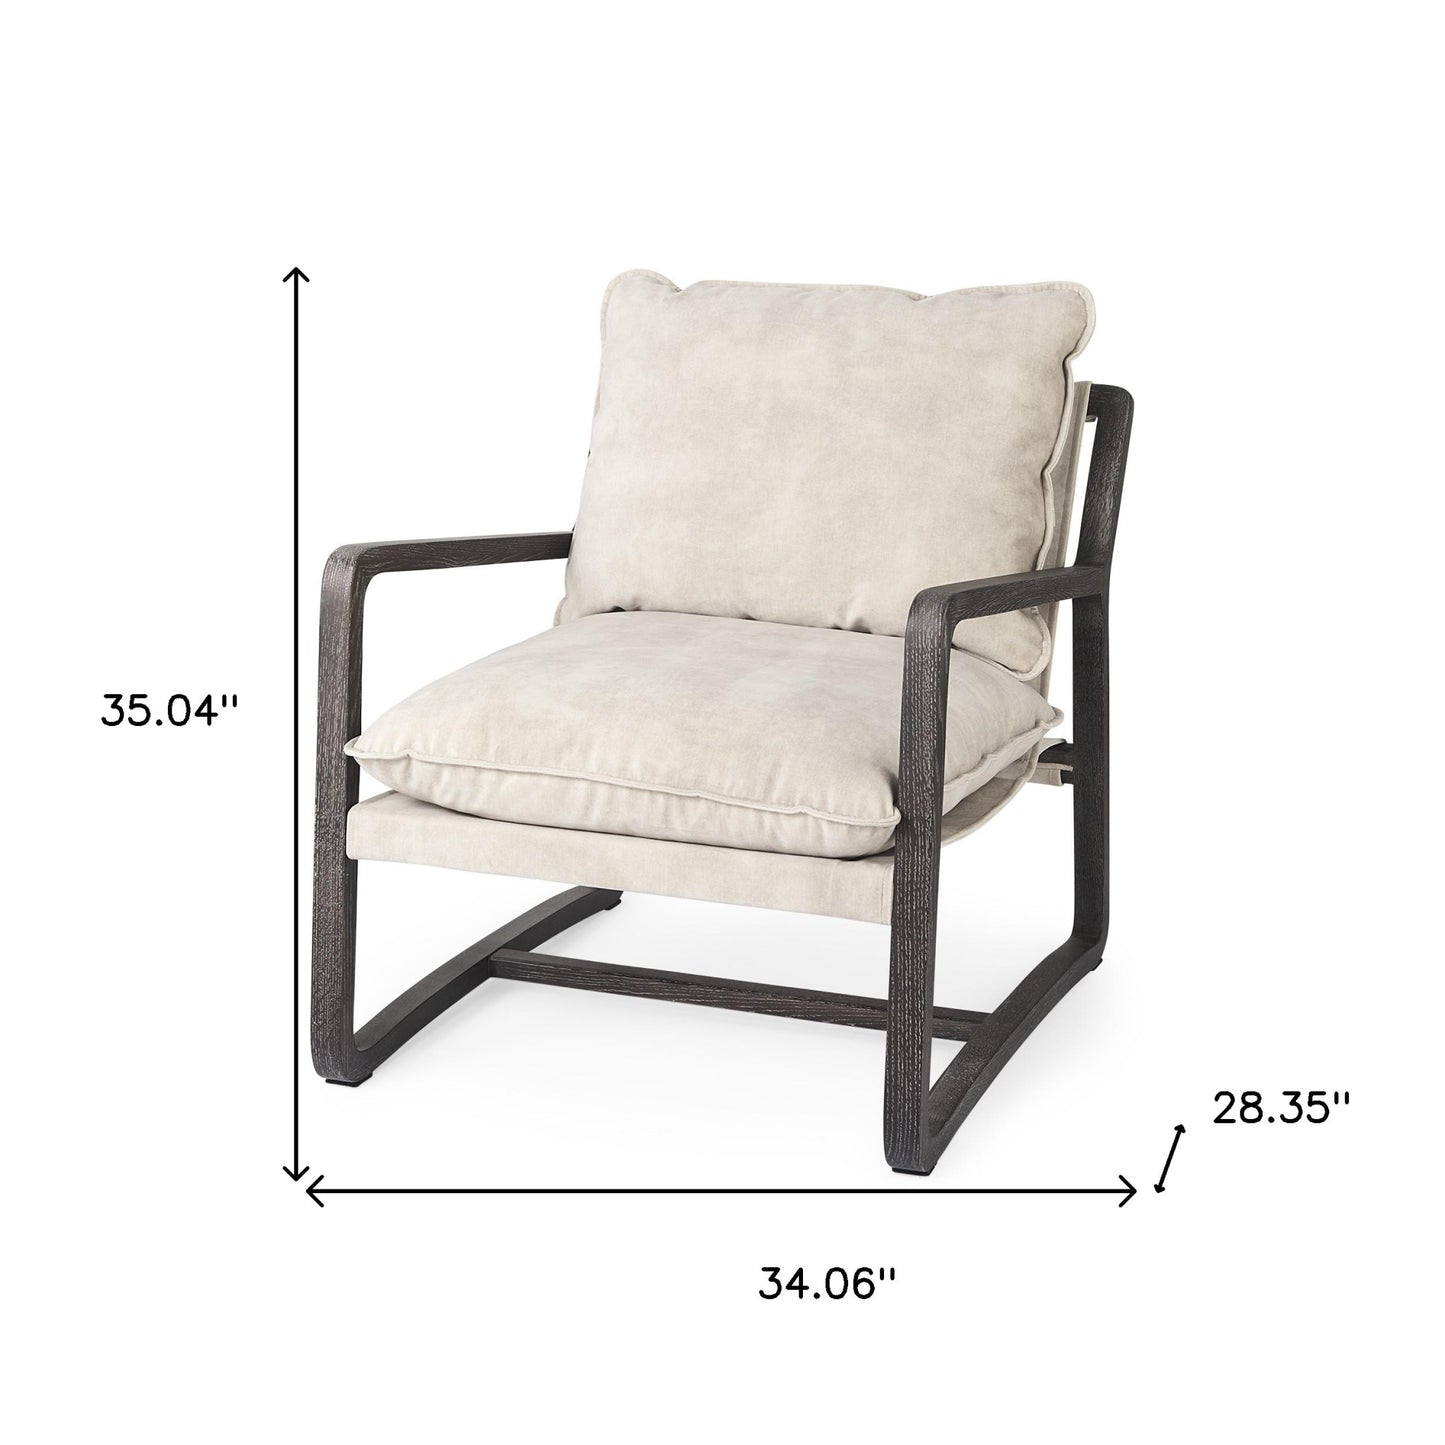 34" Cream And Black Fabric Lounge Chair